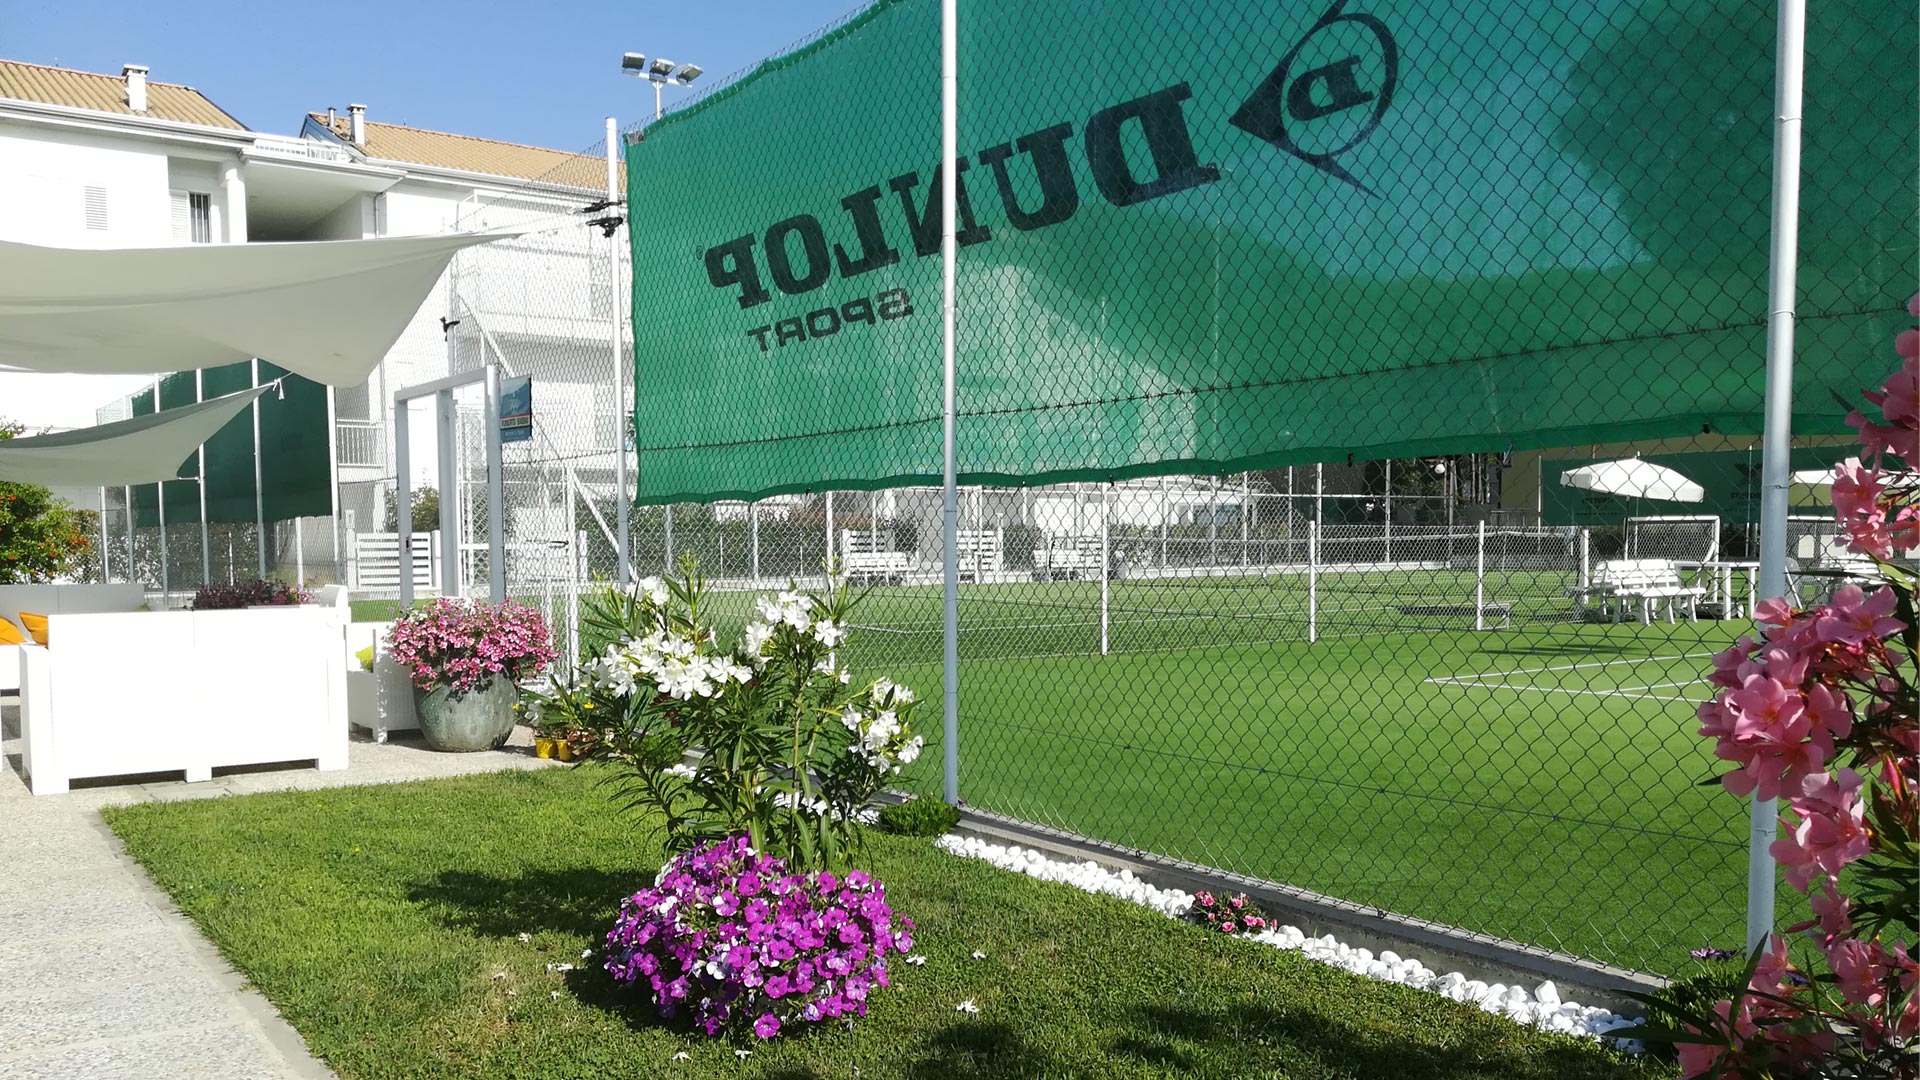 STAGE DI TENNIS WEEKEND 23/24 LUGLIO 2022 (in